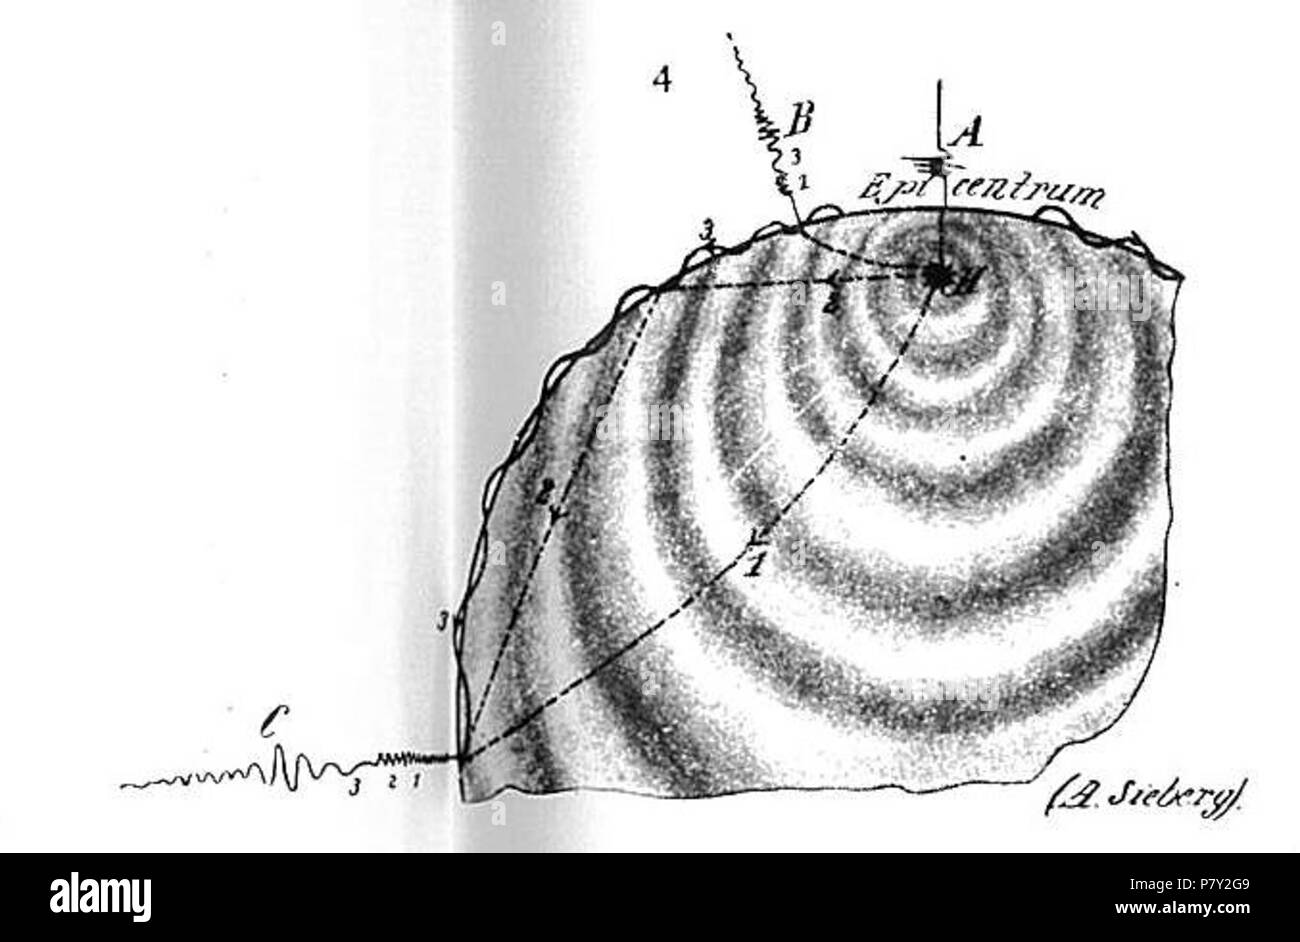 English: Extracted from the Illustrations of the entry 'Earthquake' ('Zemtesení') in Otto's Encyclopedia (Ottv Slovník Nauný. Vol. 27. Praha: J. Otto, 1908, p. 565–571). 1908 203 Illustration4 related to earthquake Stock Photo